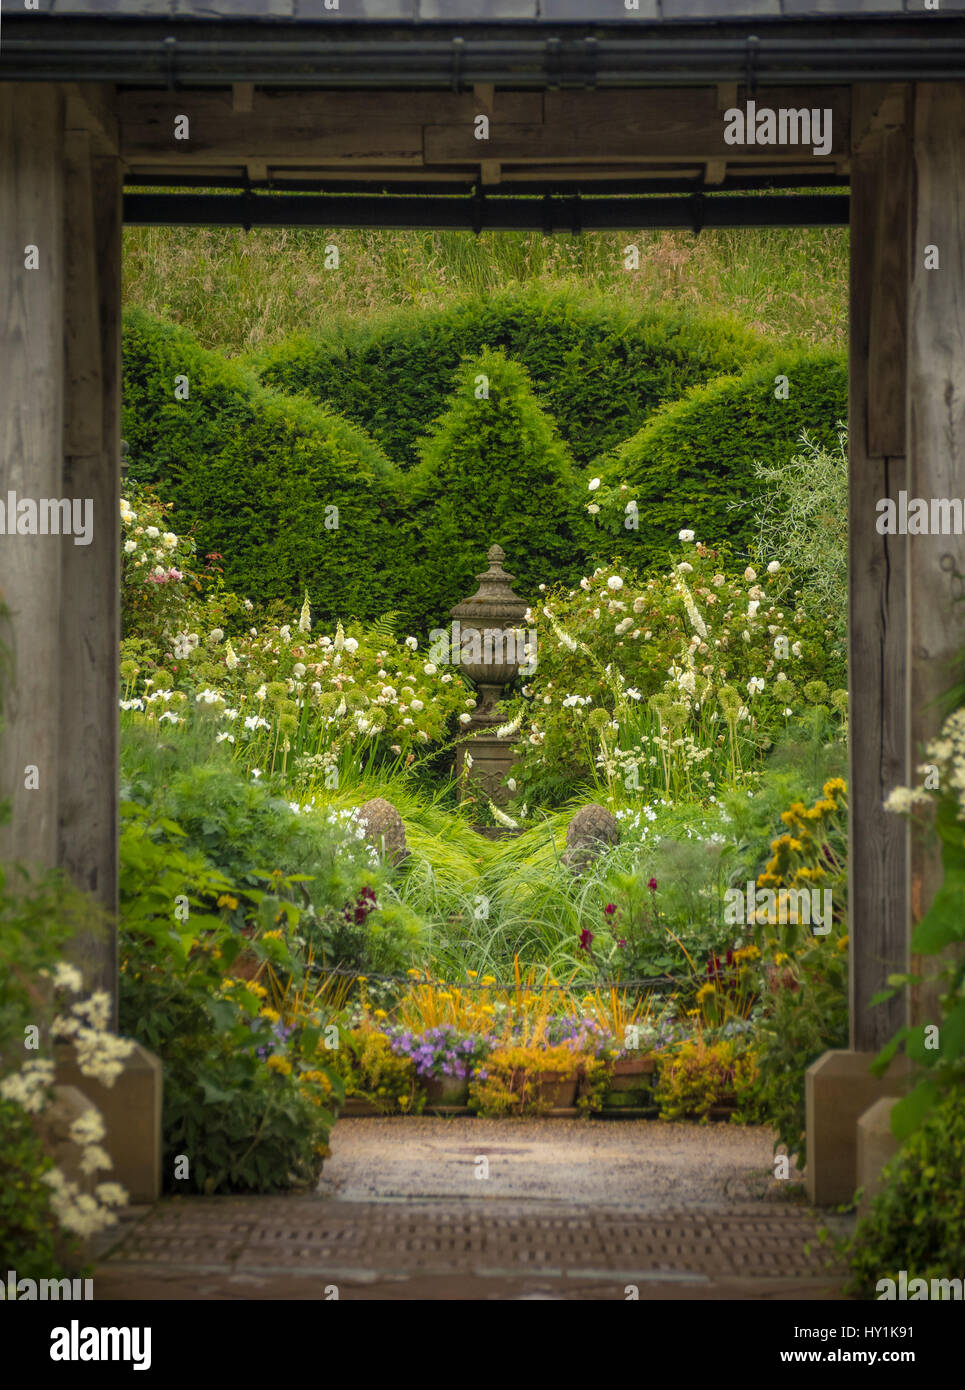 Formal mixed garden planting with topiary hedging seen through wooden structure. Stock Photo